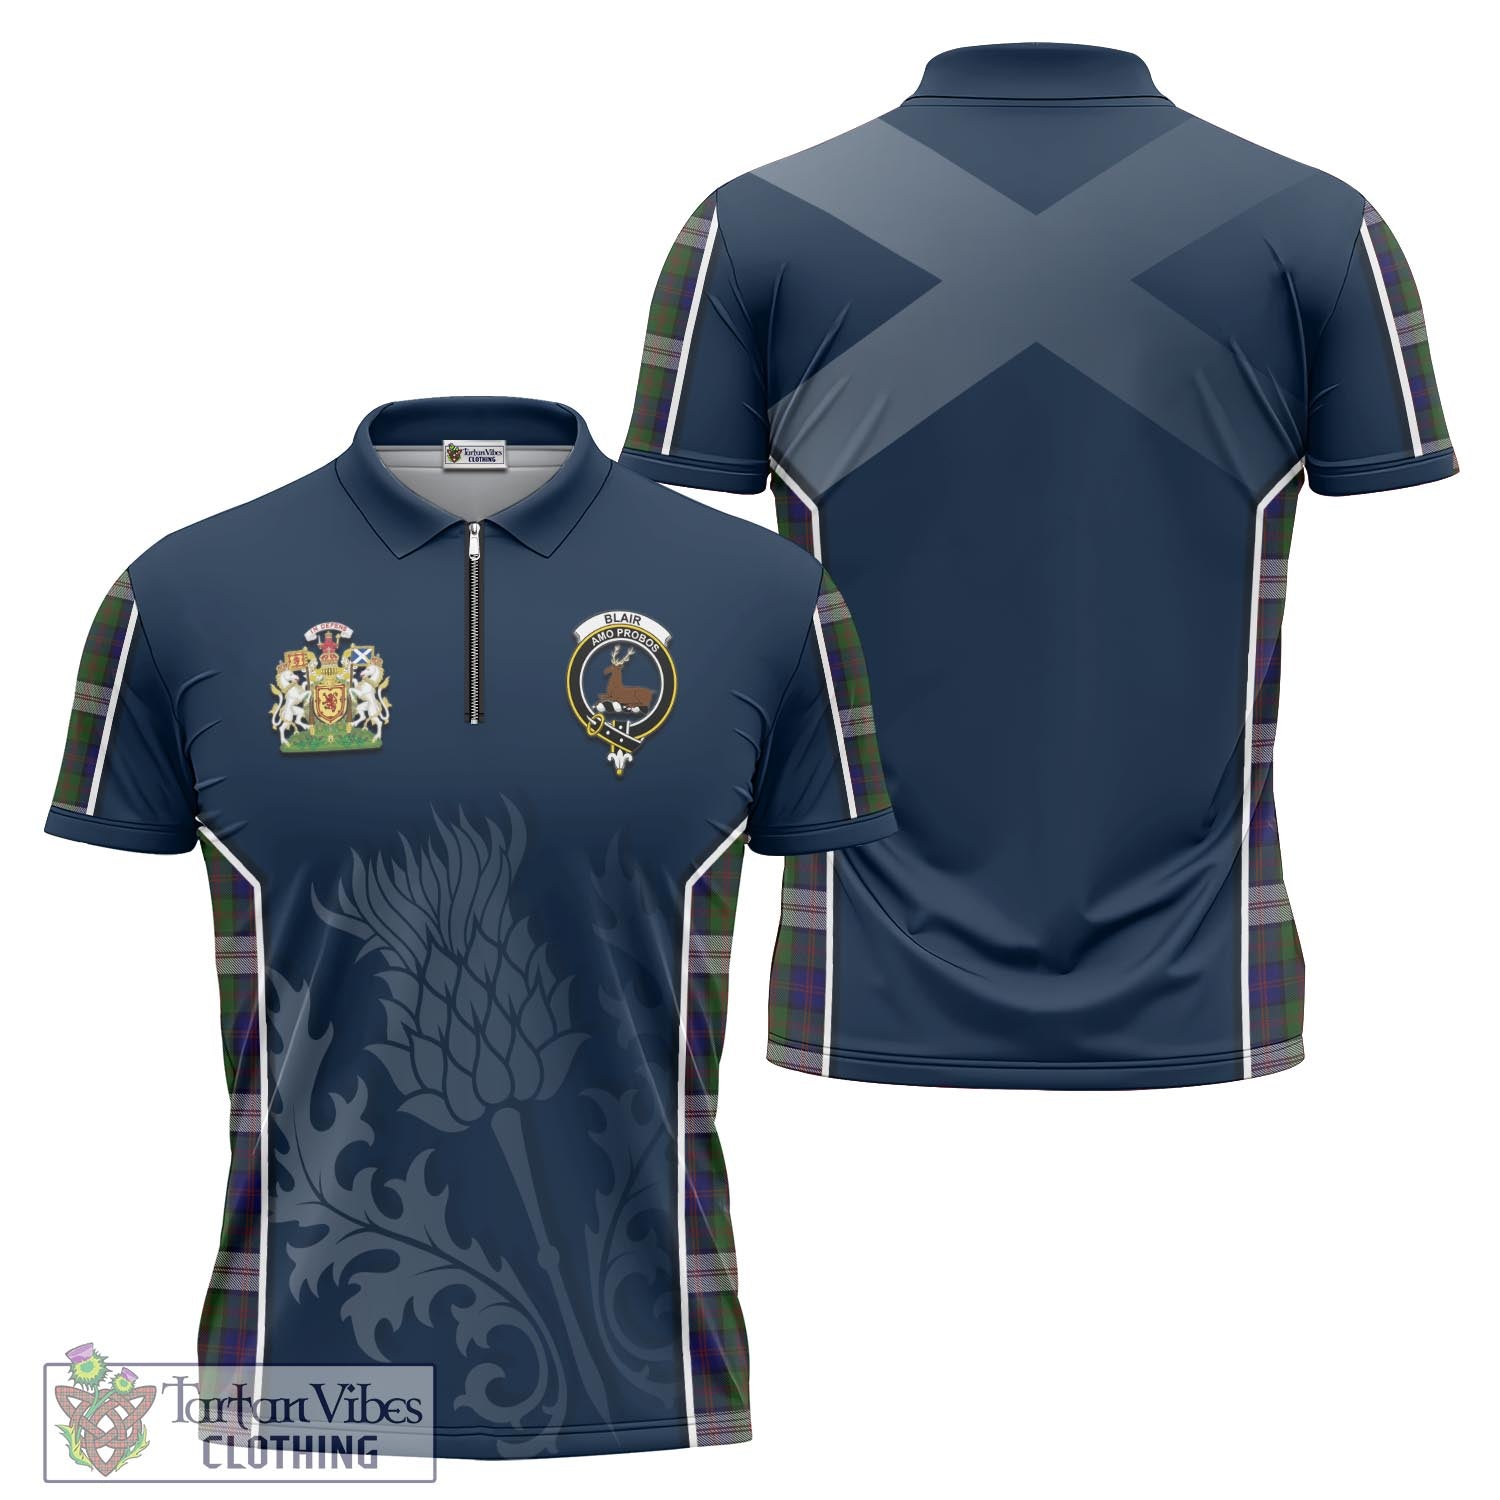 Tartan Vibes Clothing Blair Dress Tartan Zipper Polo Shirt with Family Crest and Scottish Thistle Vibes Sport Style